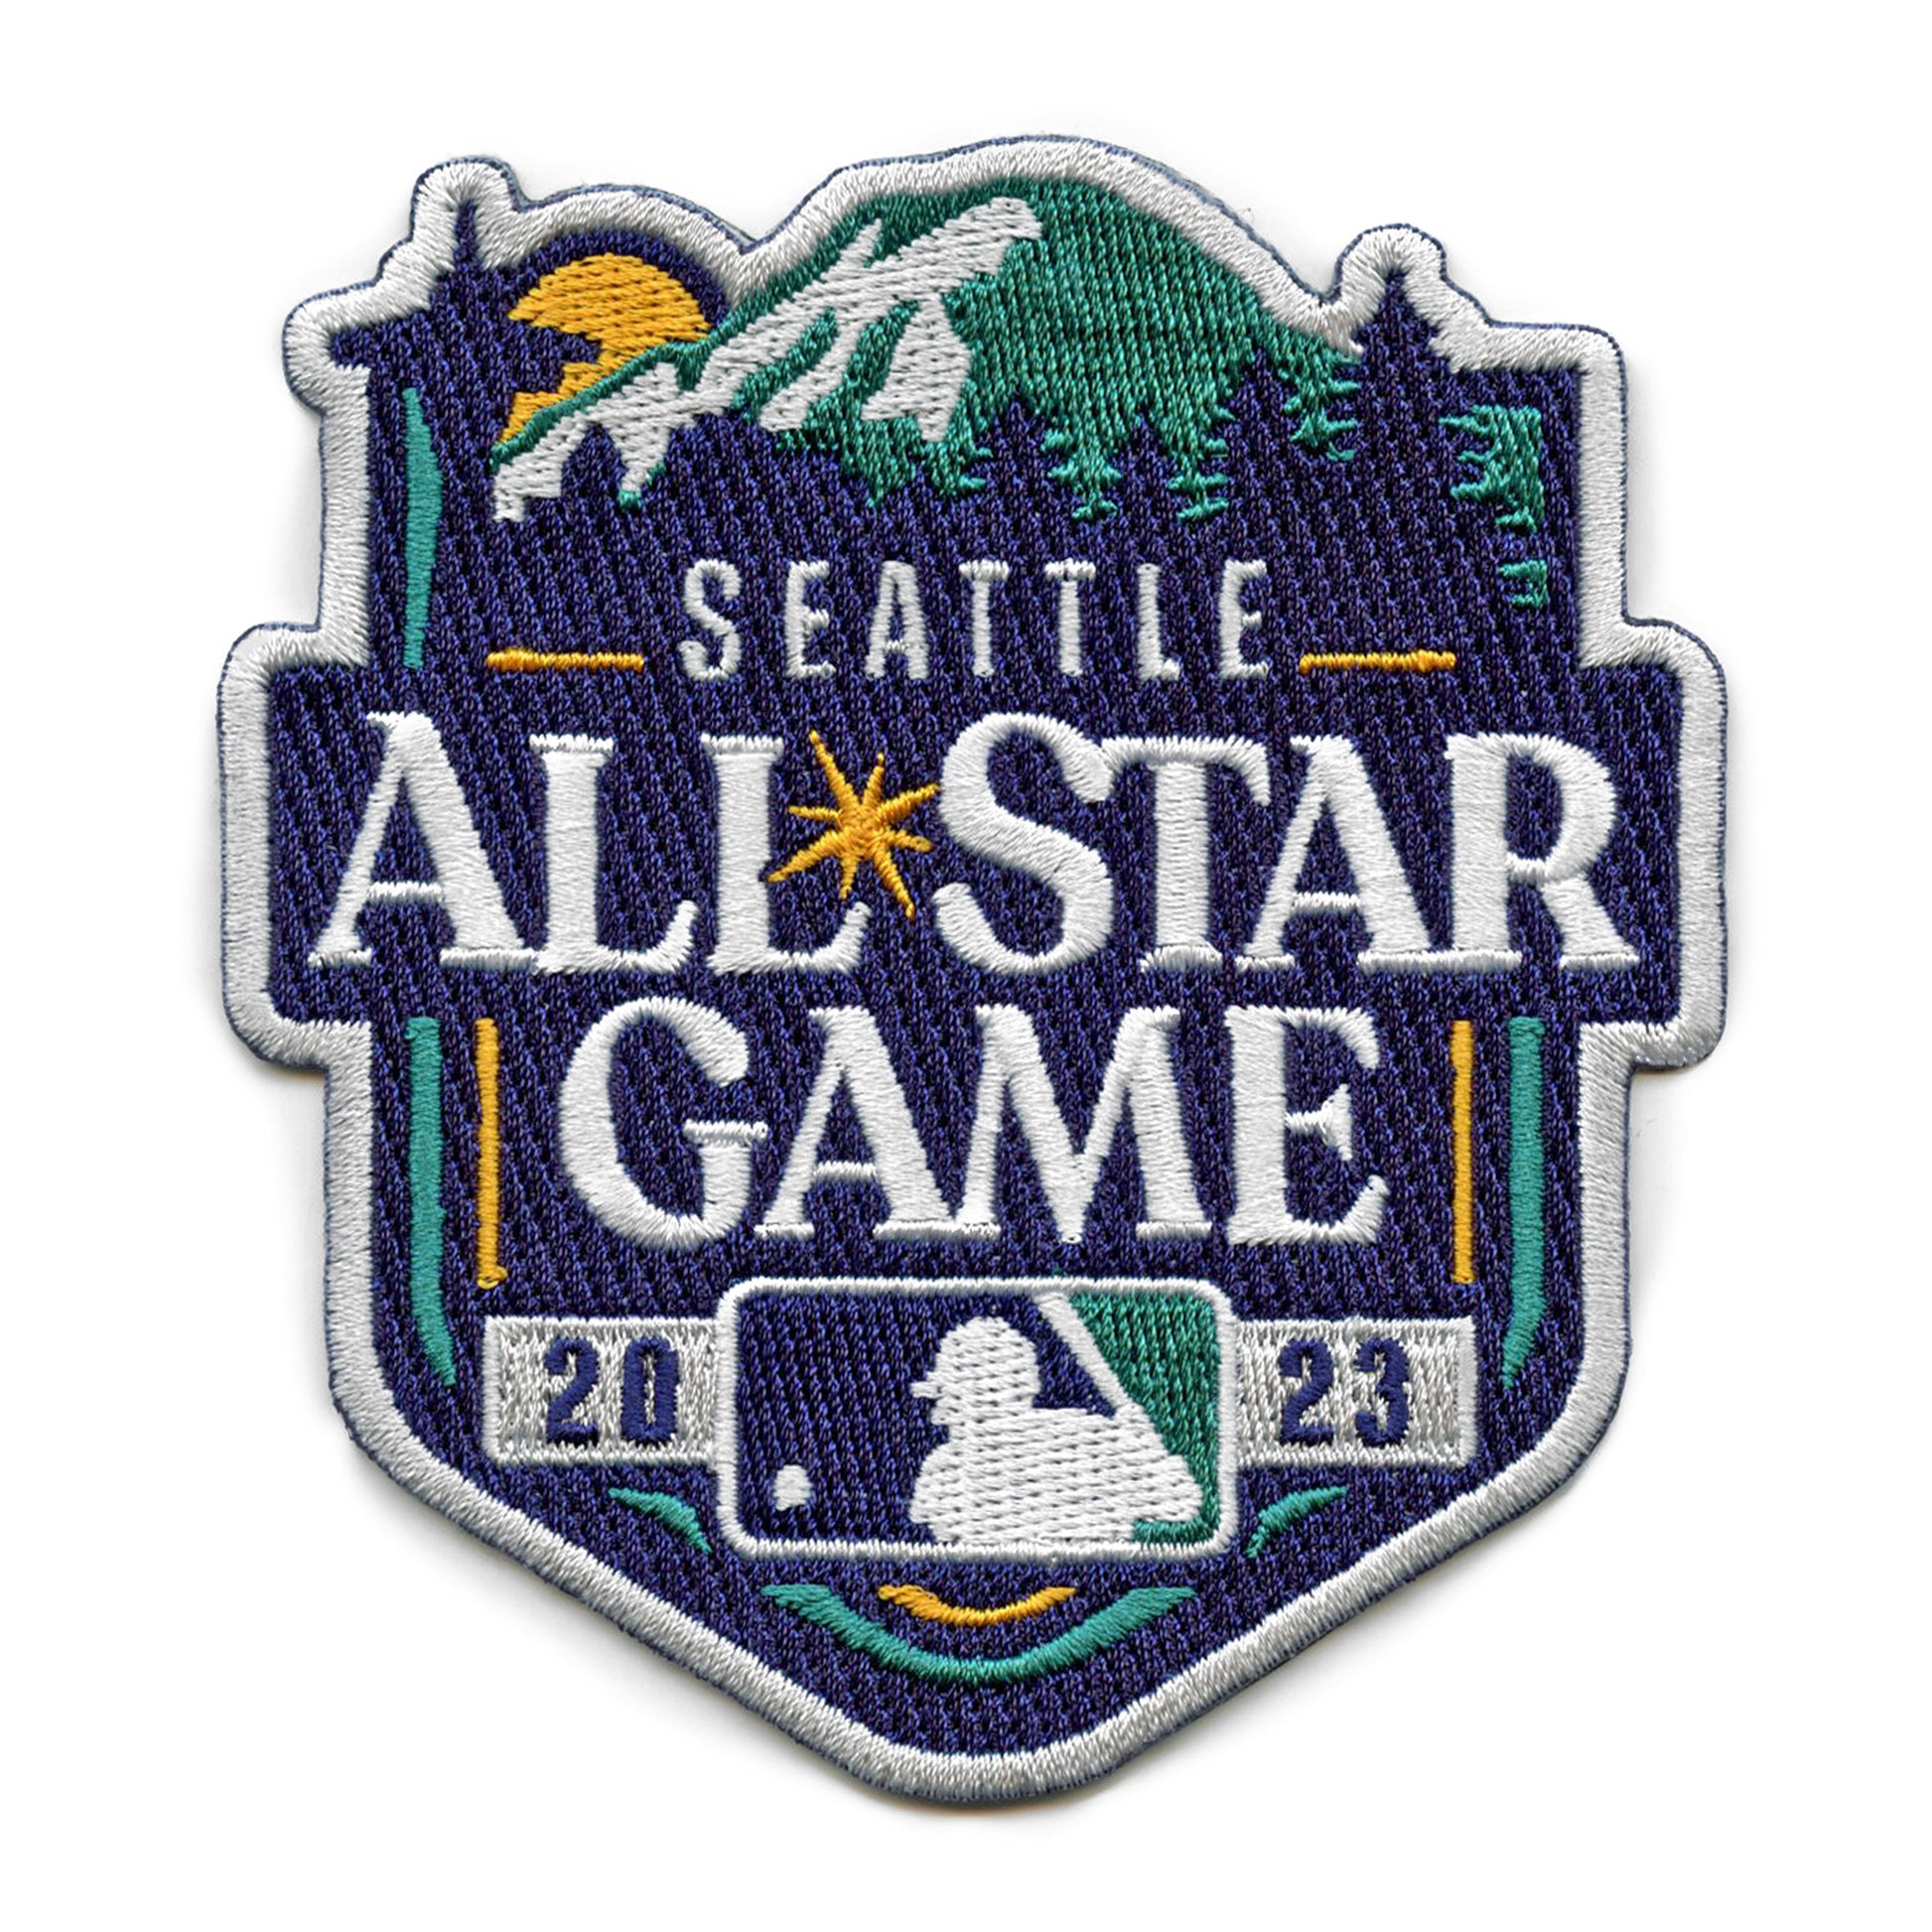 Atlanta Braves cover All-Star Game patch on team jerseys after